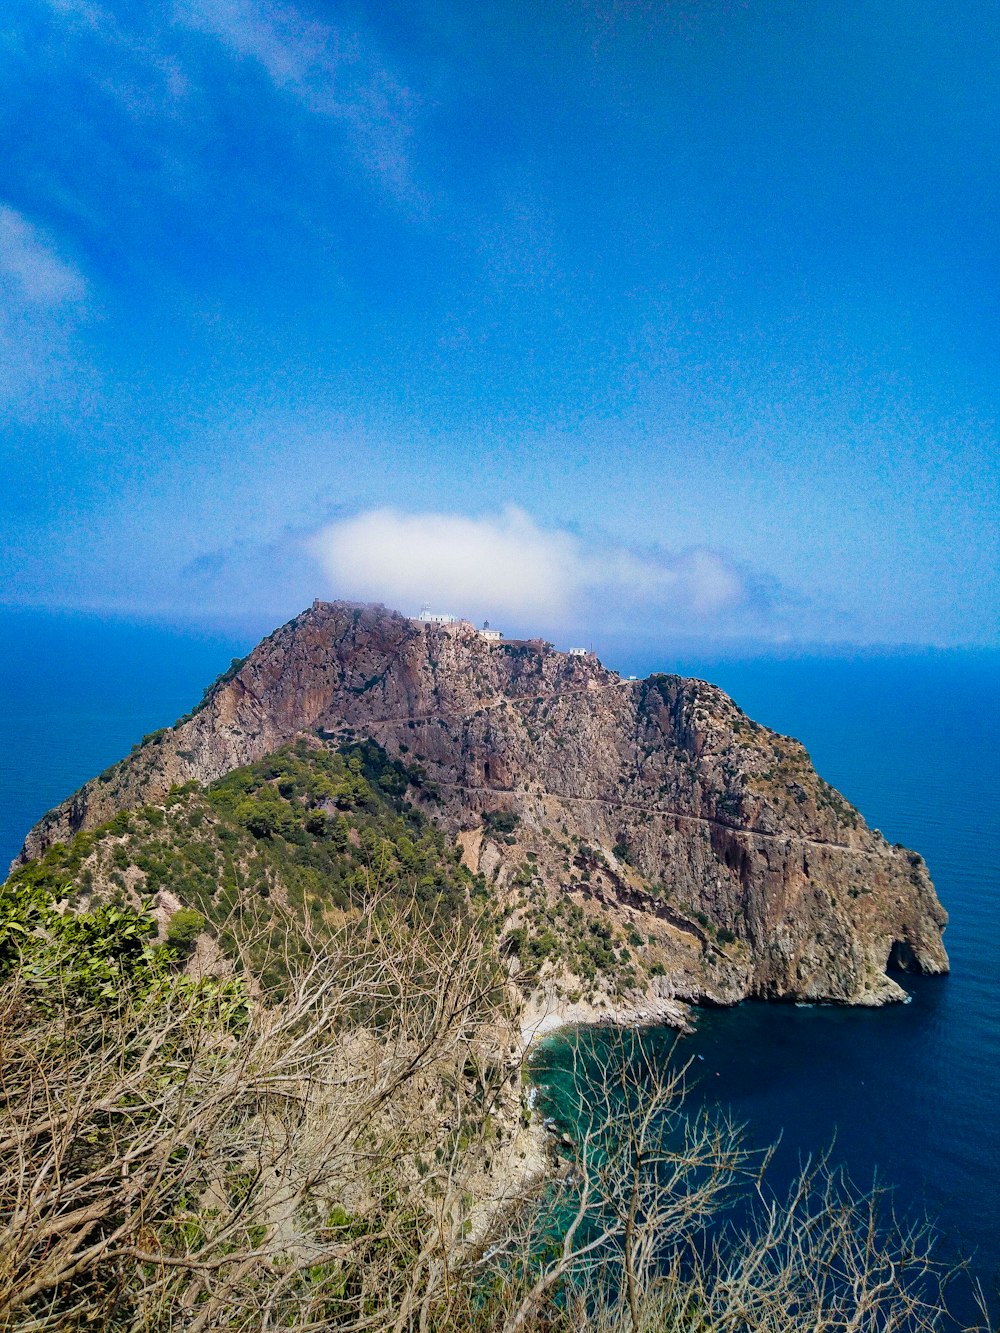 green and brown mountain beside blue sea under blue sky during daytime